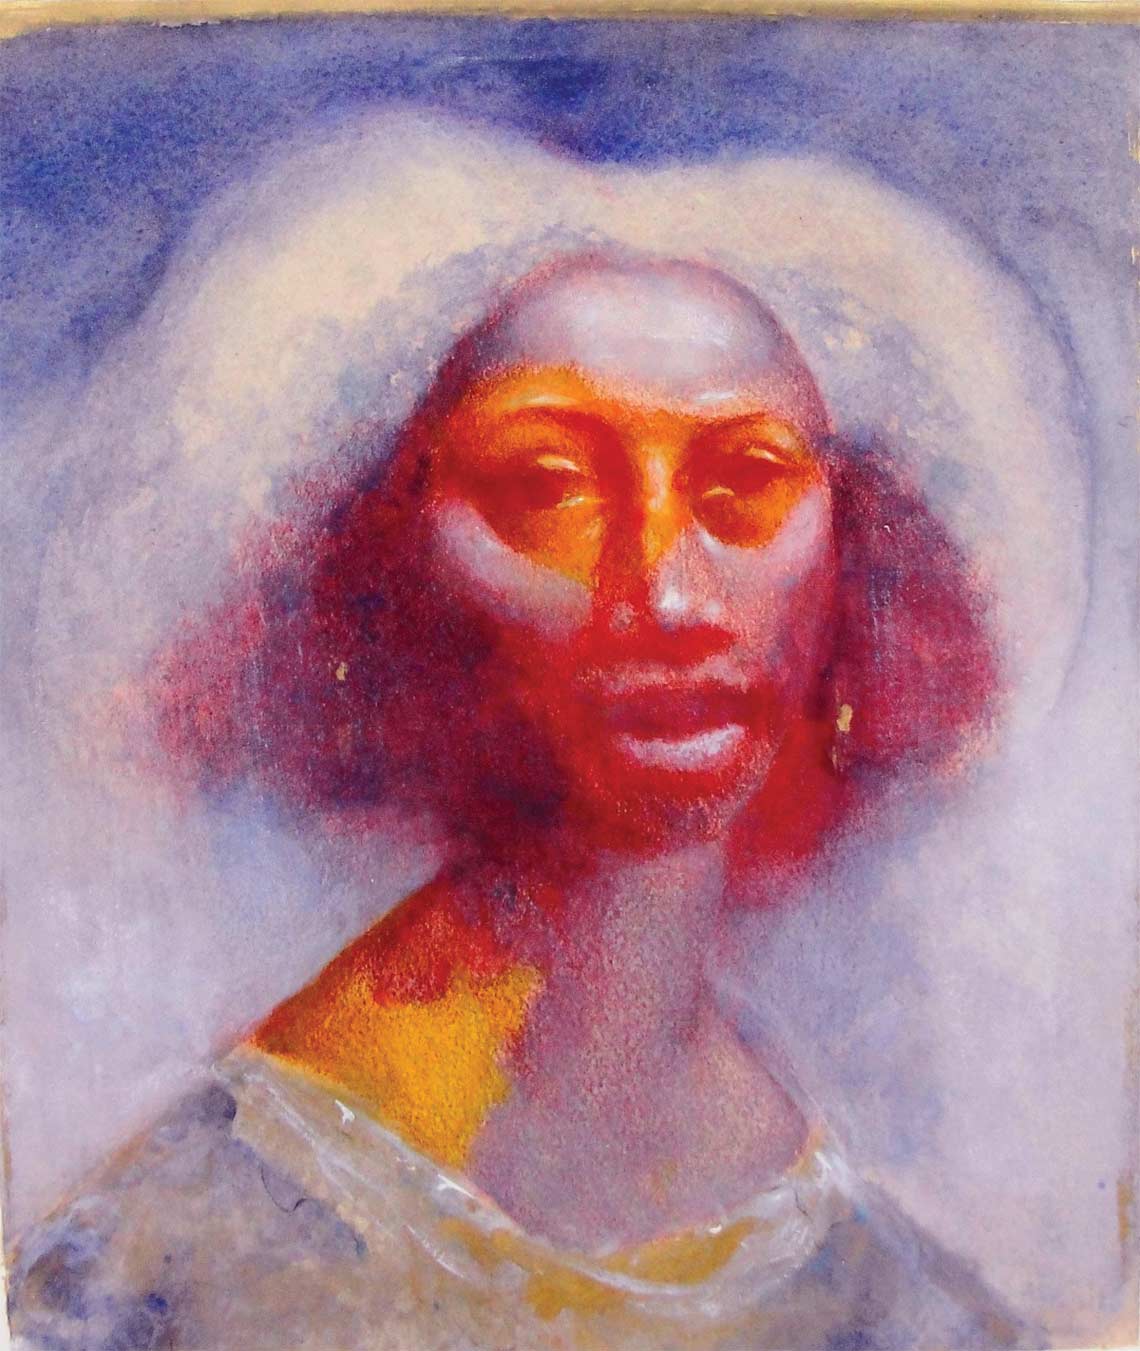 Impressionist painting of African American woman - colors are shages of blue, purple, orange, red and white.